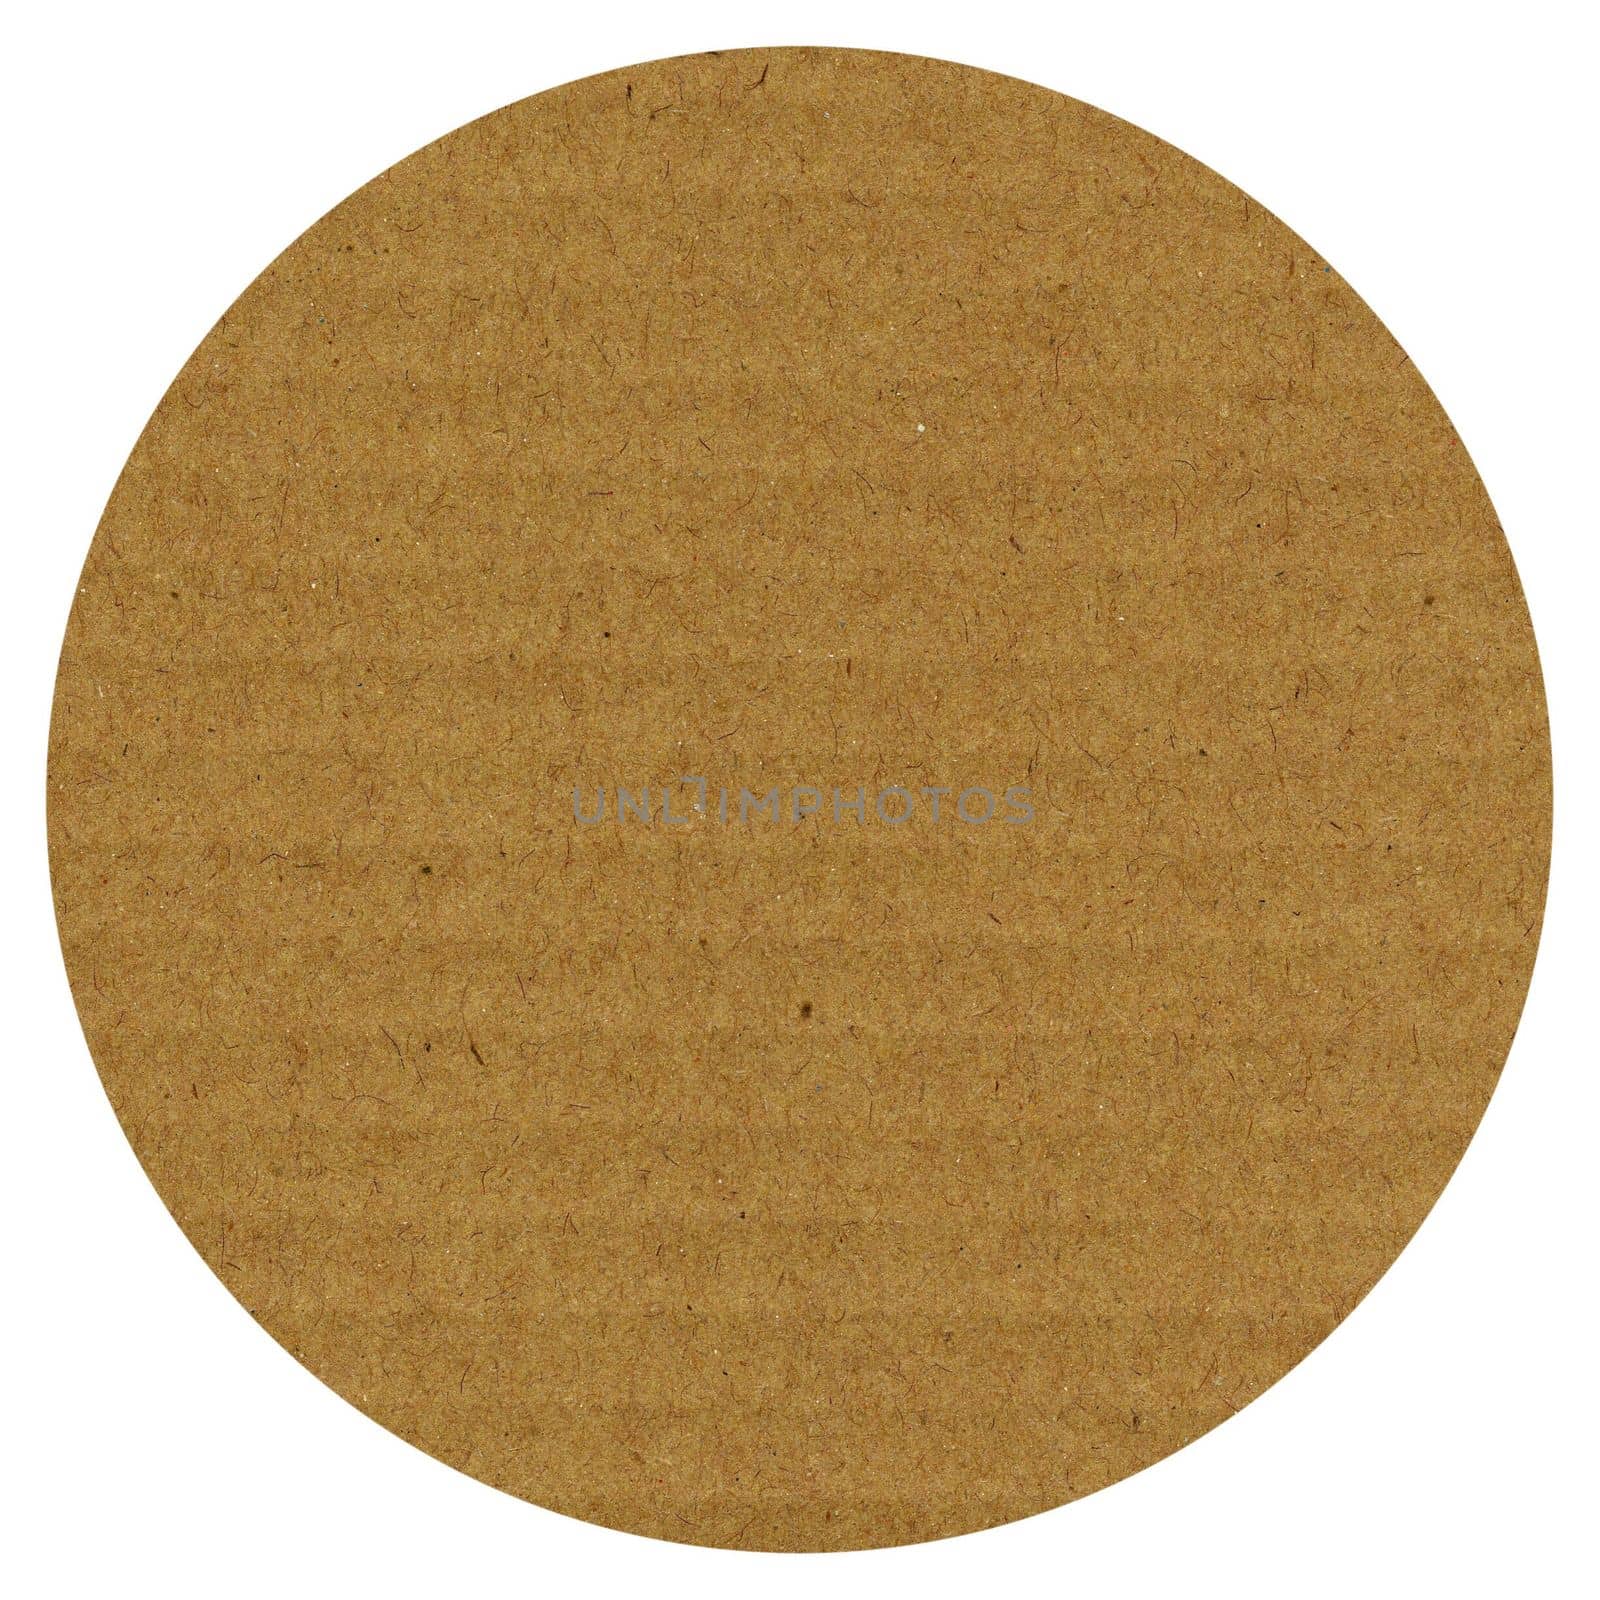 brown corrugated cardboard texture isolated over white background